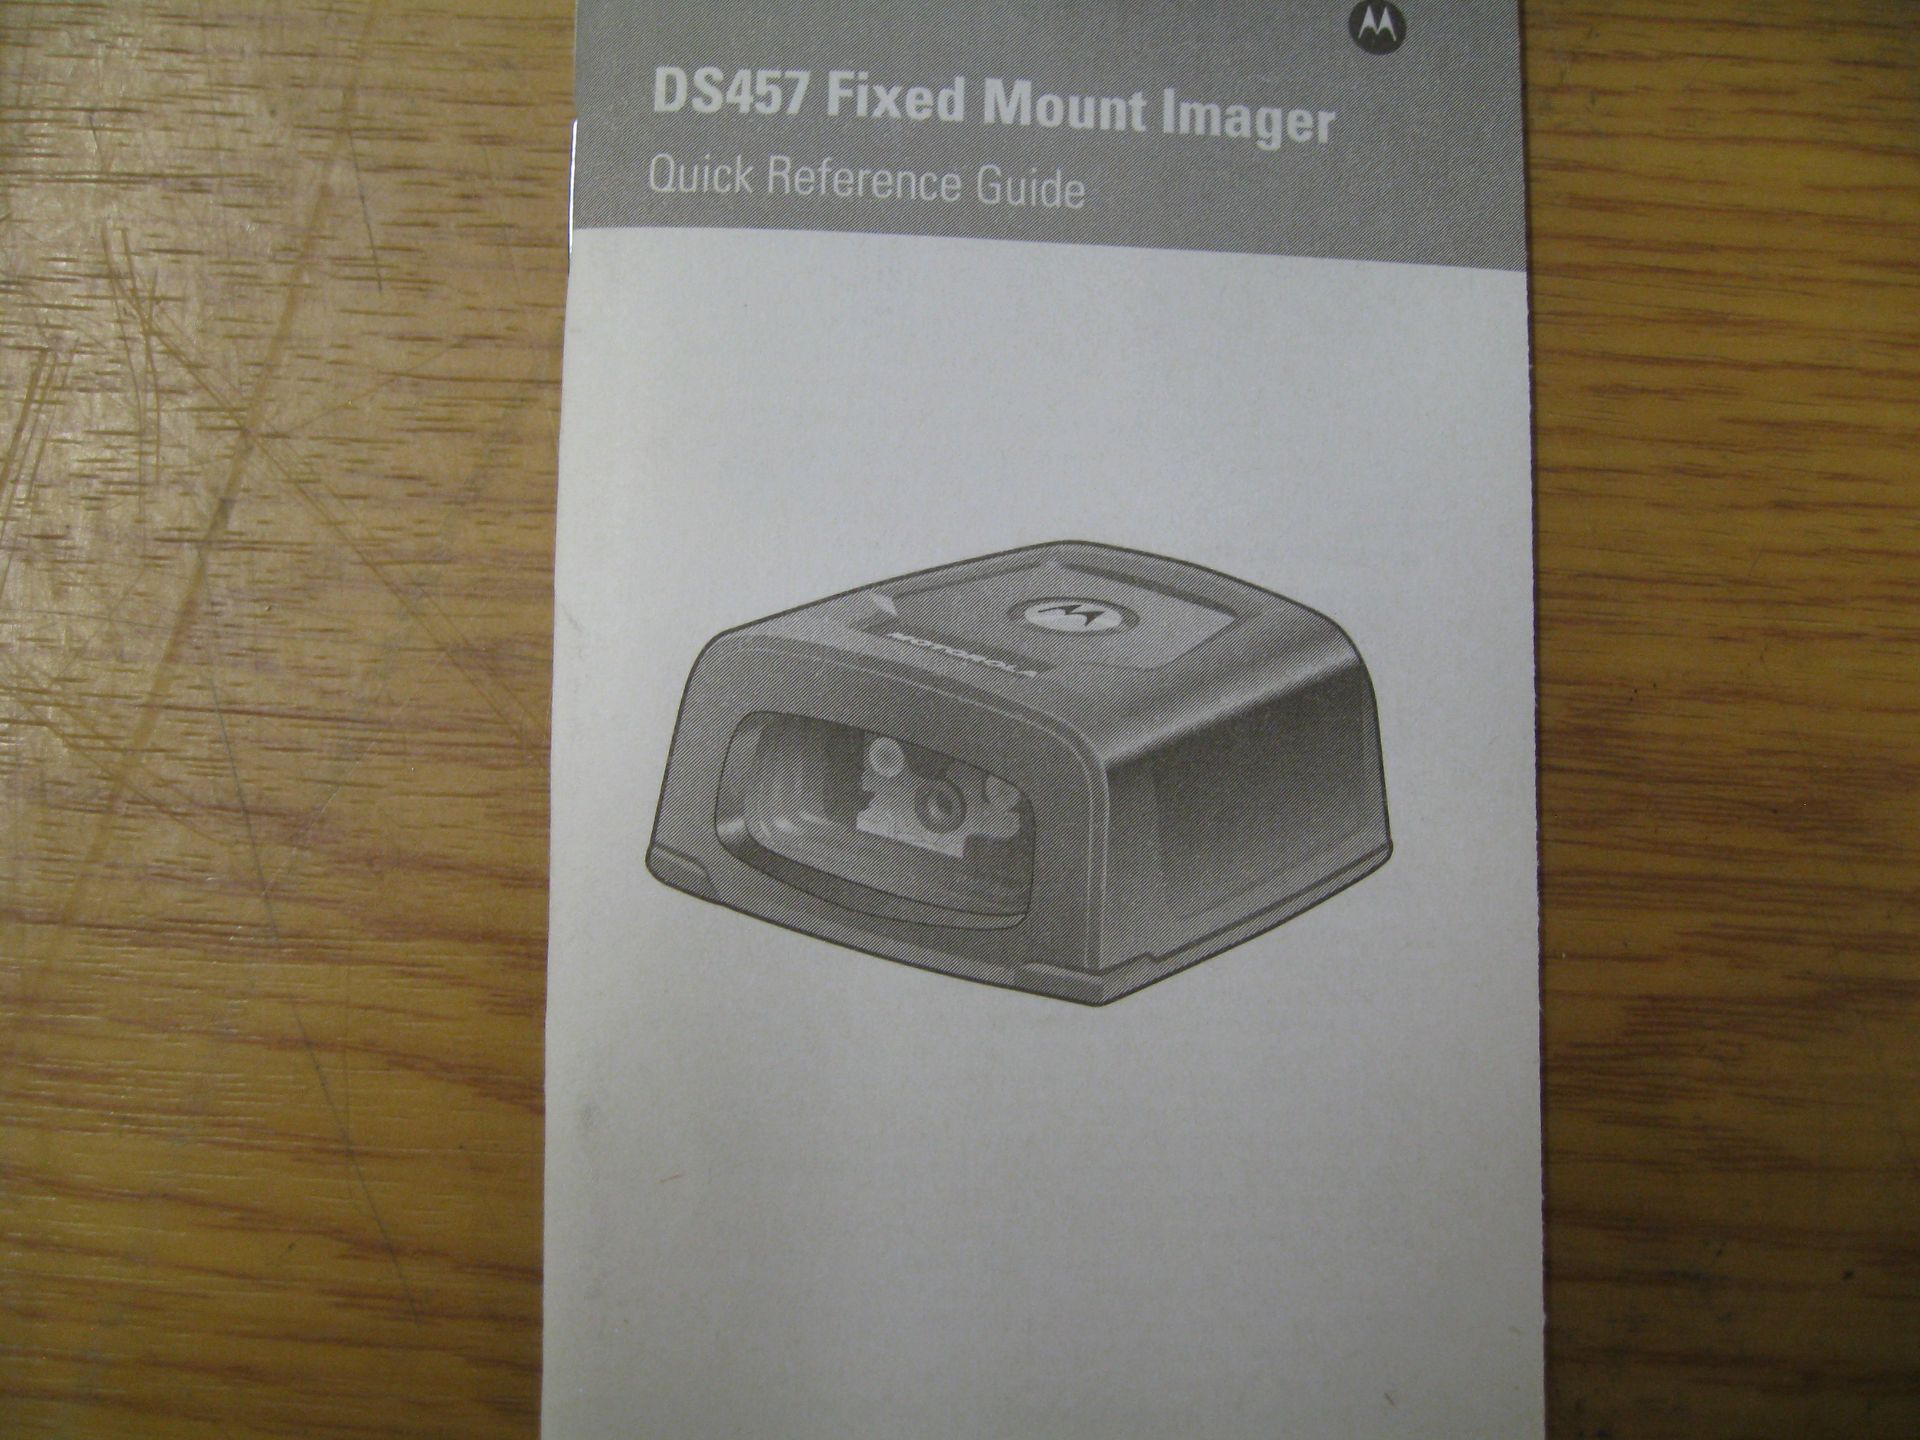 NEW & BOXED Motorola DS457-SR Fixed Mount Barcode Reader Scanner P/N: DS457-SR20009. AS PHOTO - Image 5 of 5